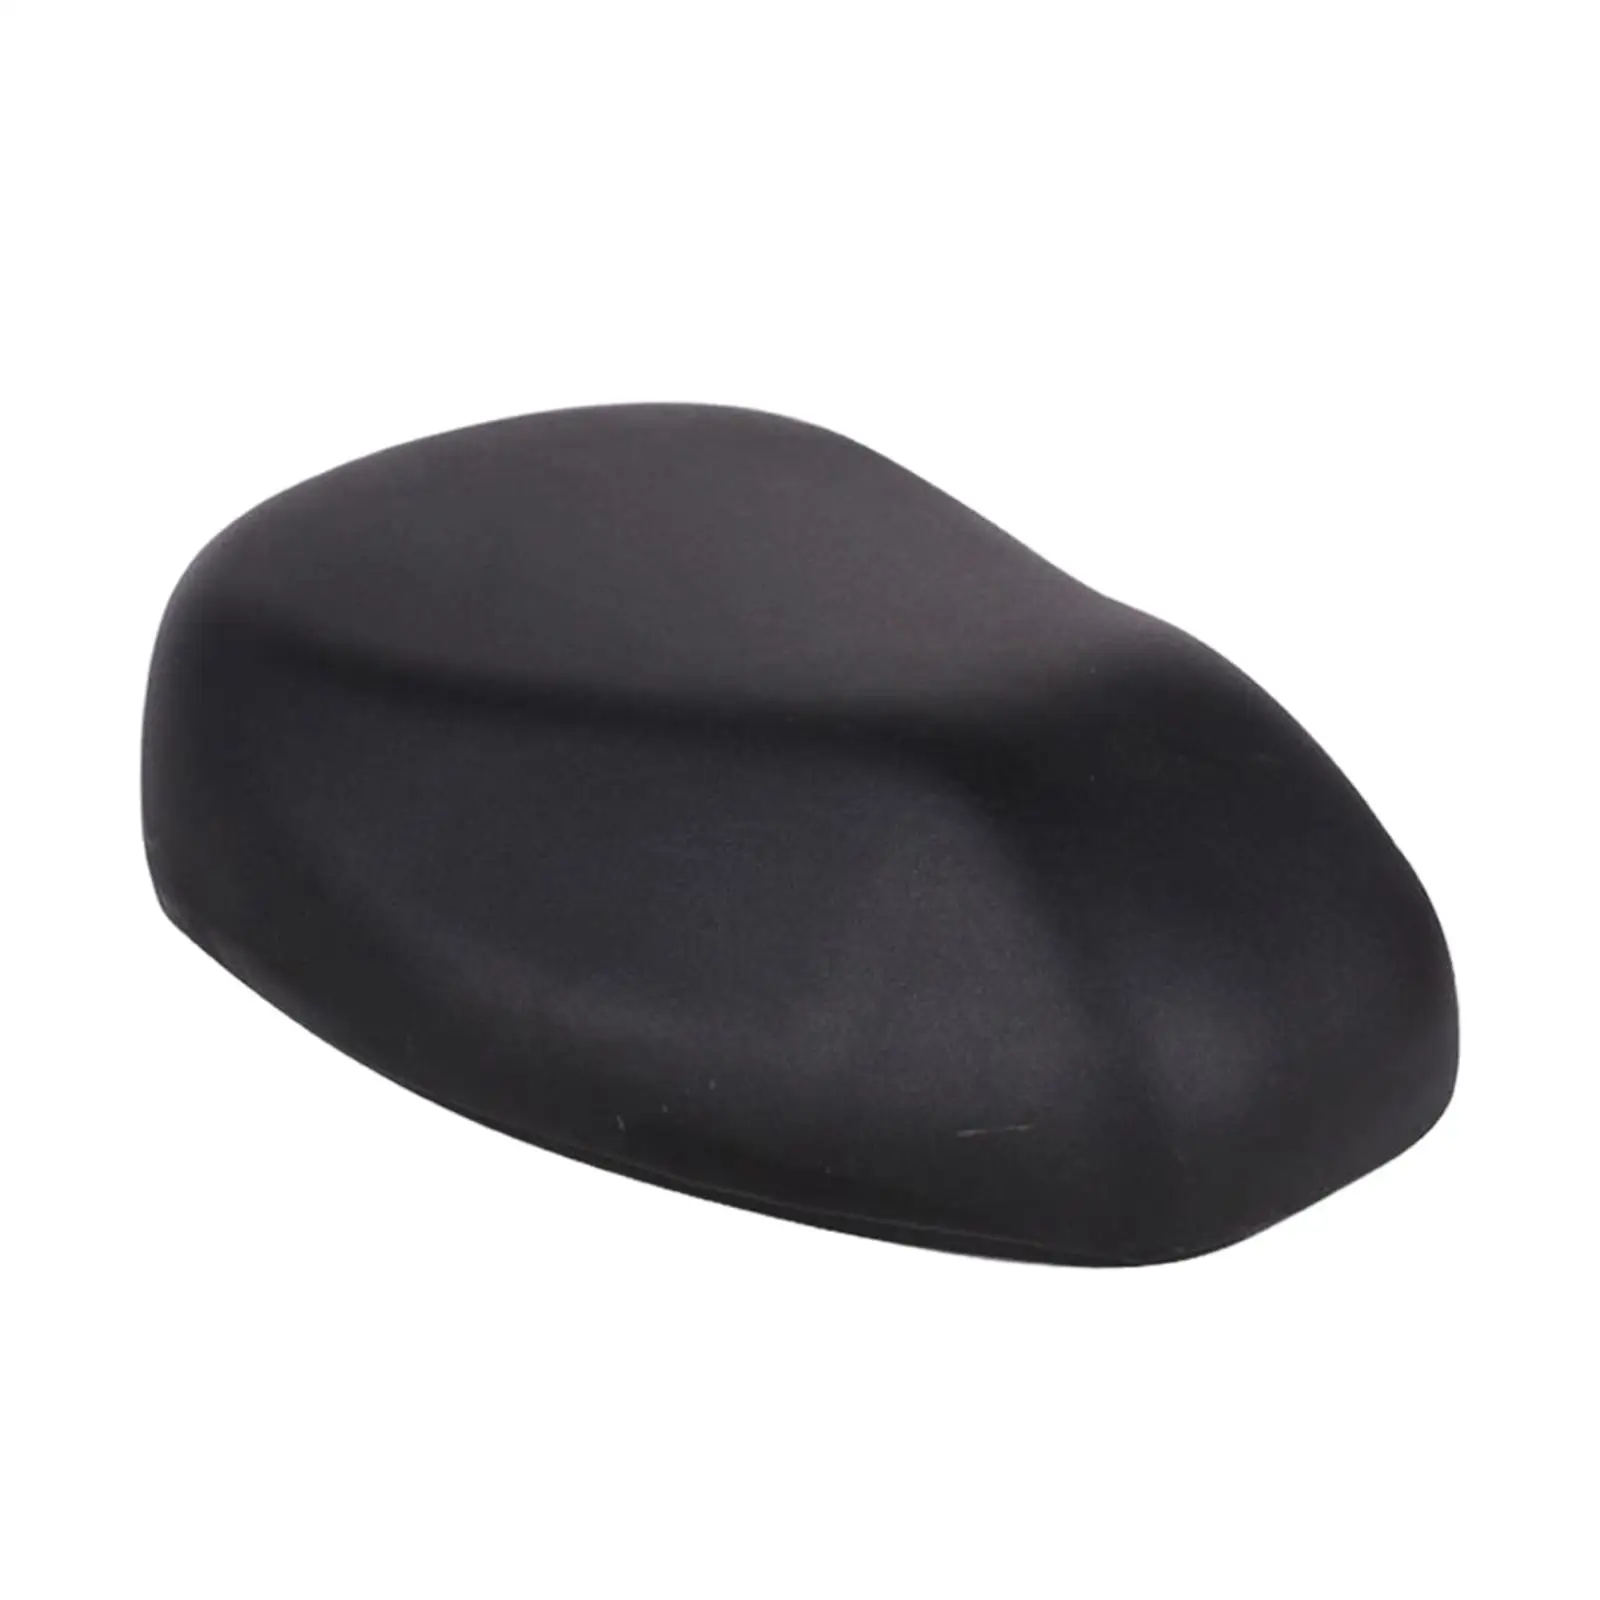 Bike Seat Cushion Saddle Wide Comfortable Firm Fit for Electric Scooter